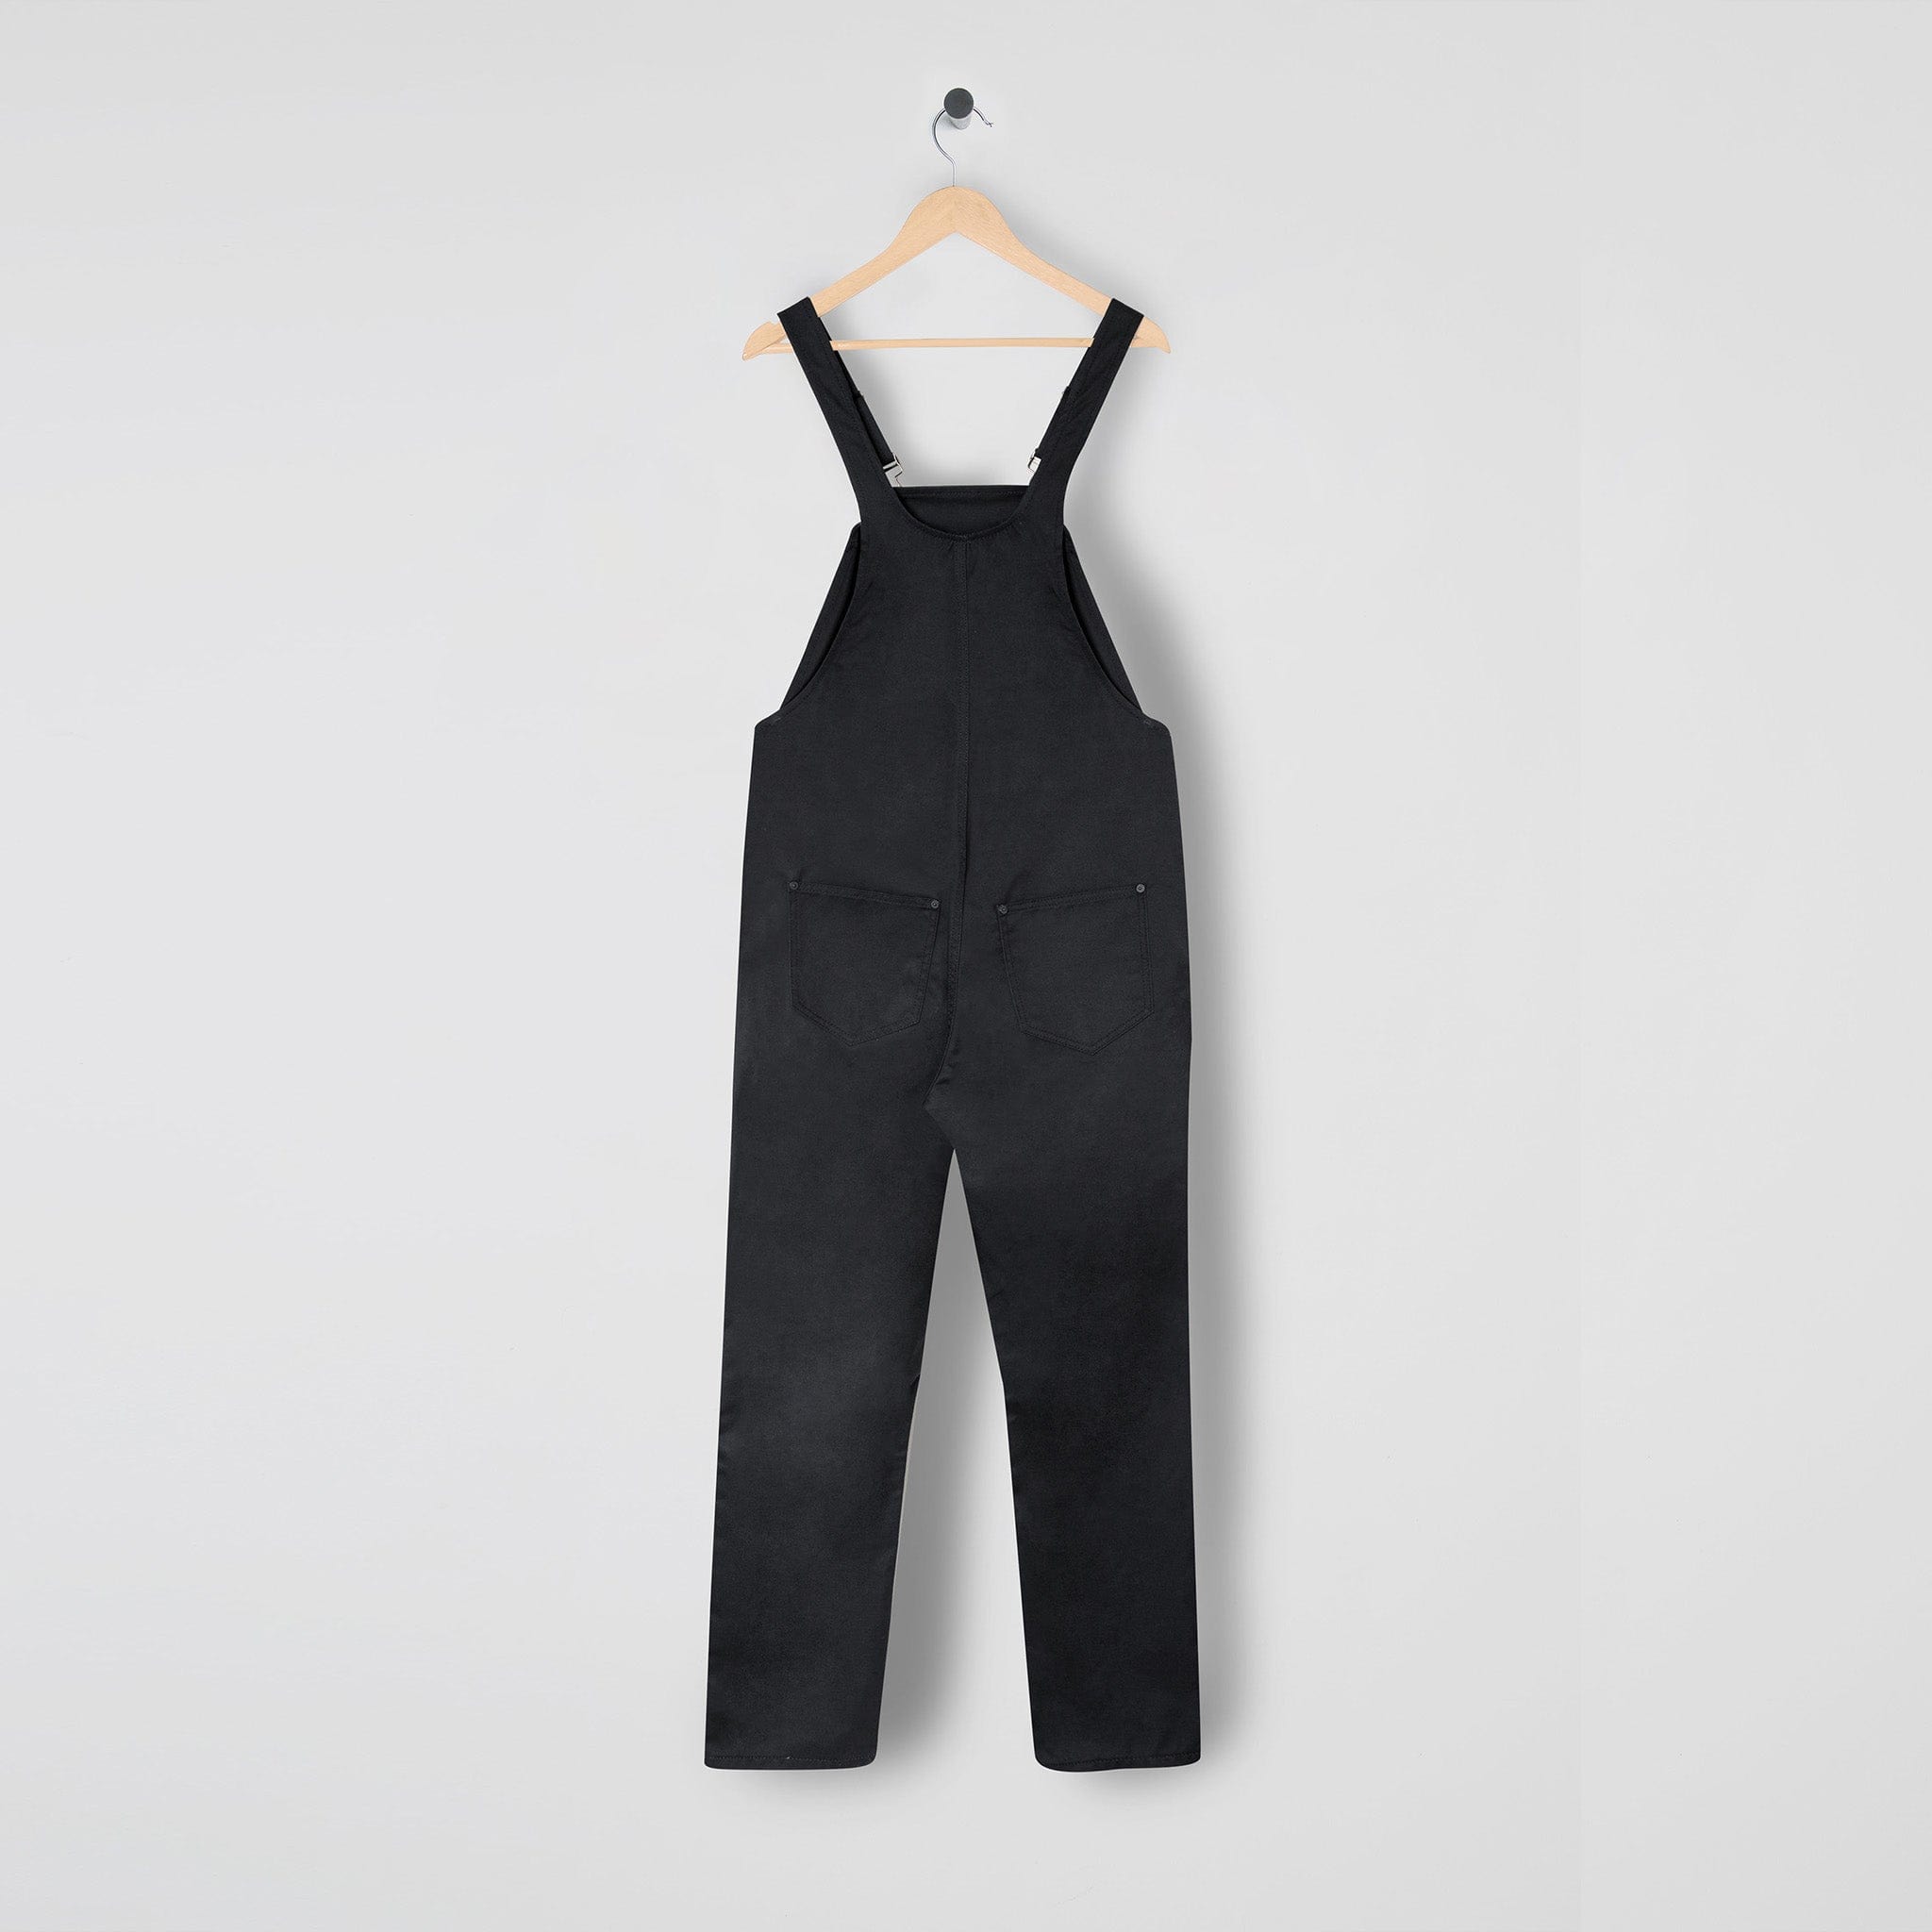 Timeless and Durable M.C.O's Polycotton Black Dungarees for Men and Women.